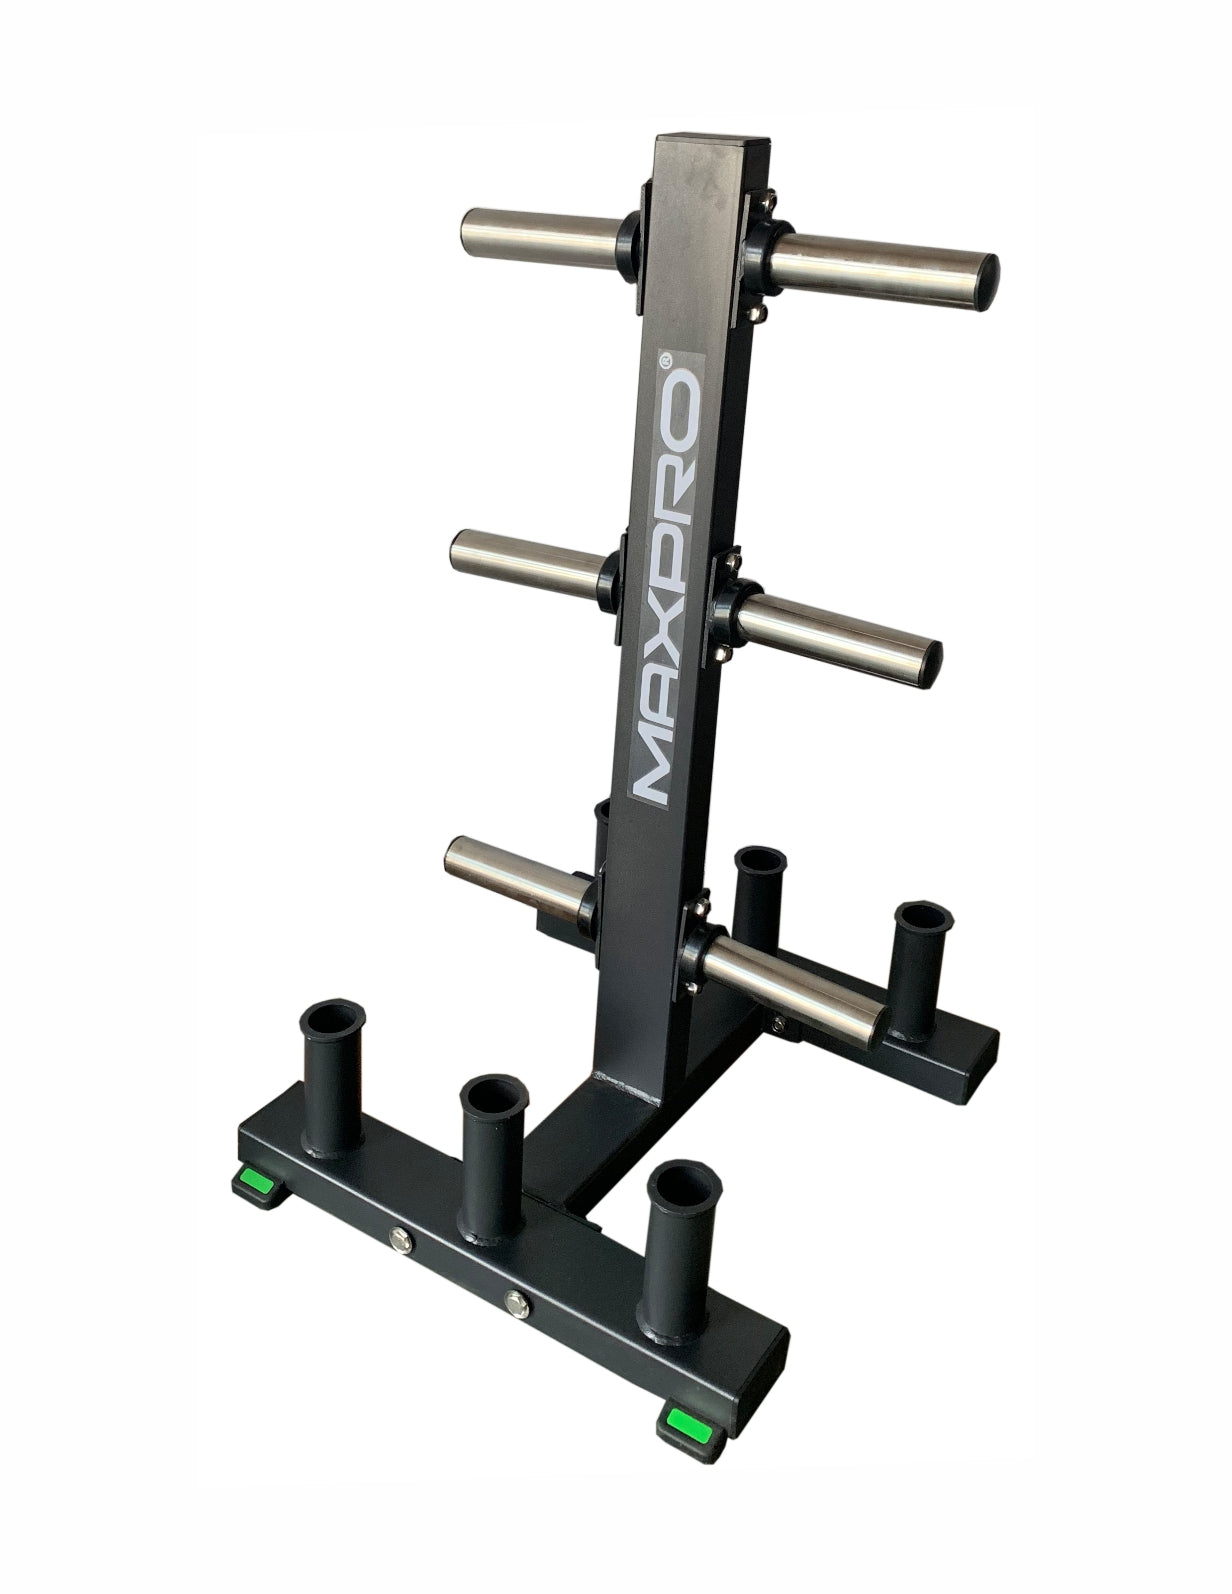 MXP-D92 PLATE TREE WITH 6 OLYMPIC BAR